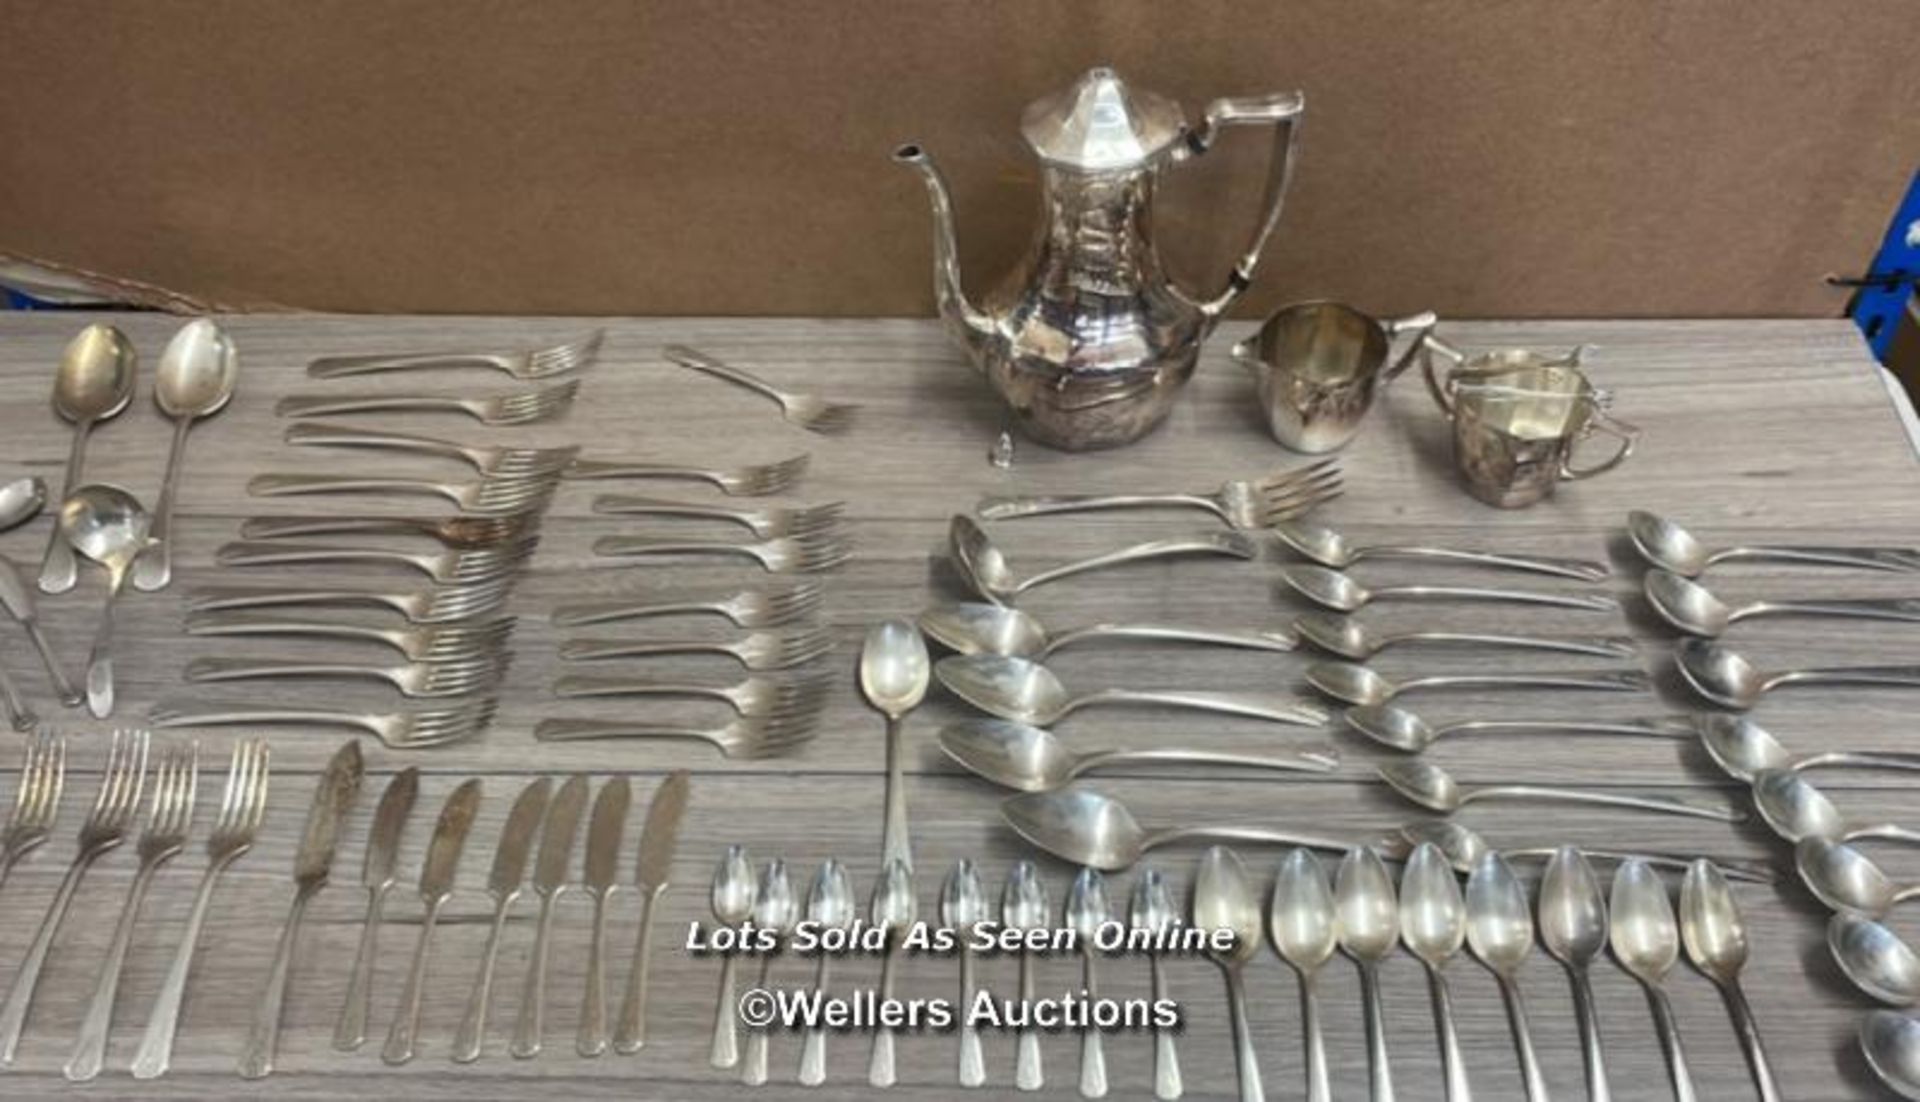 A LARGE COLLECTION OF COMMUNITY PLATE CUTLERY, COFFEE POT, MILK JUG, SUGAR BOWL AND SUGAR NIPS